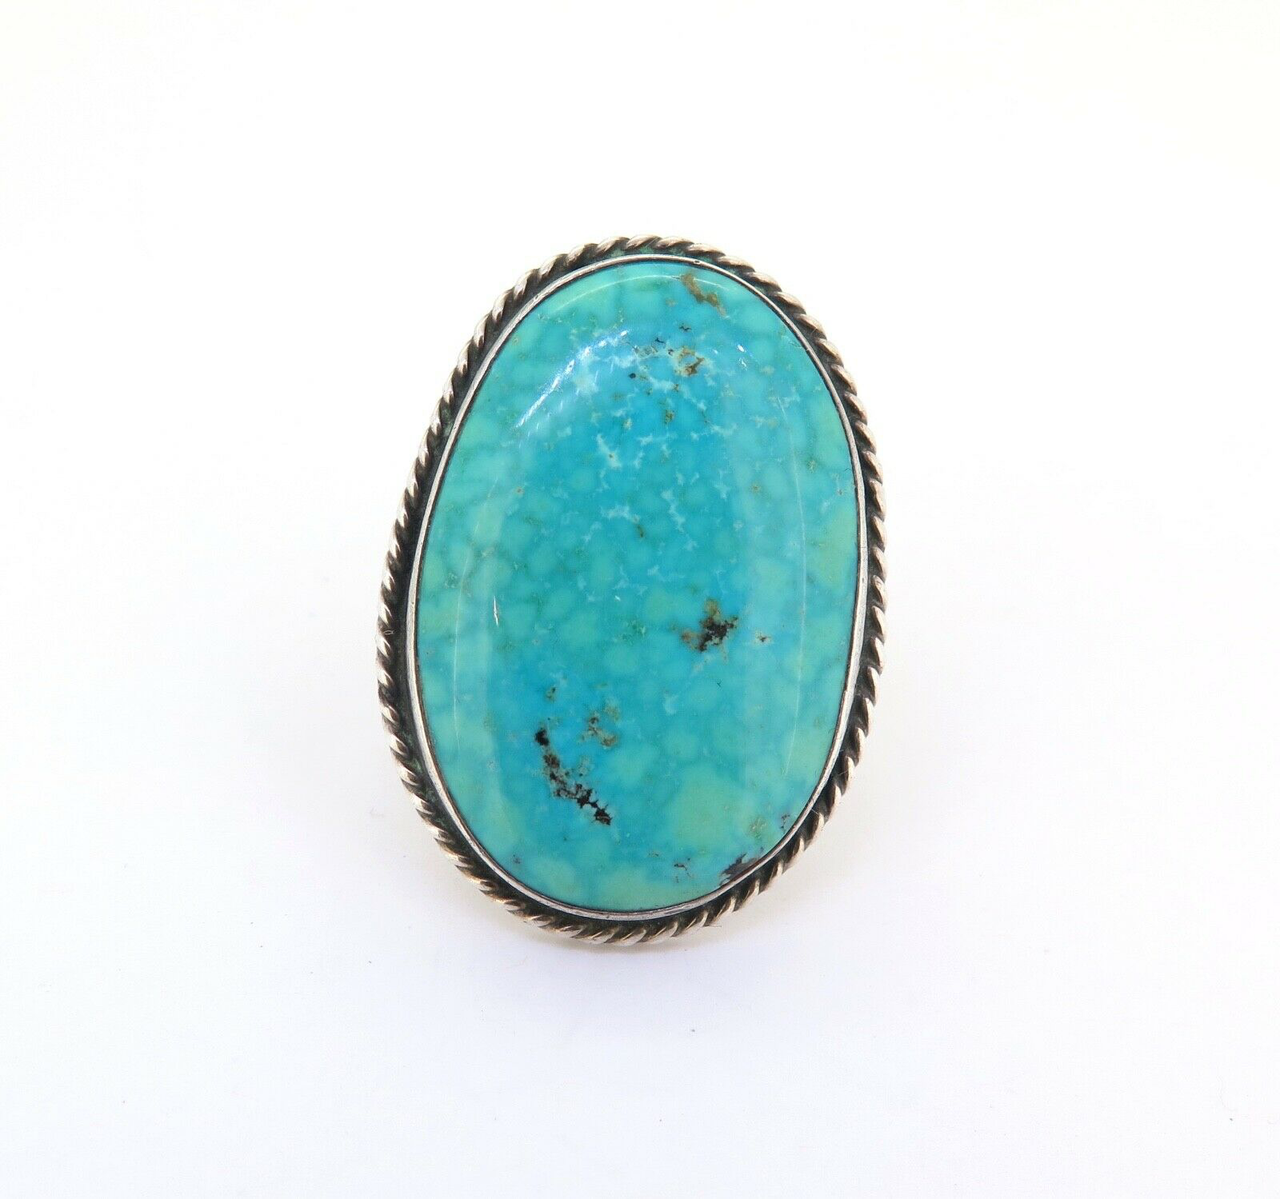 Signed Michael Rogers Handmade Paiute Turquoise Sterling Silver Ring 22.3g